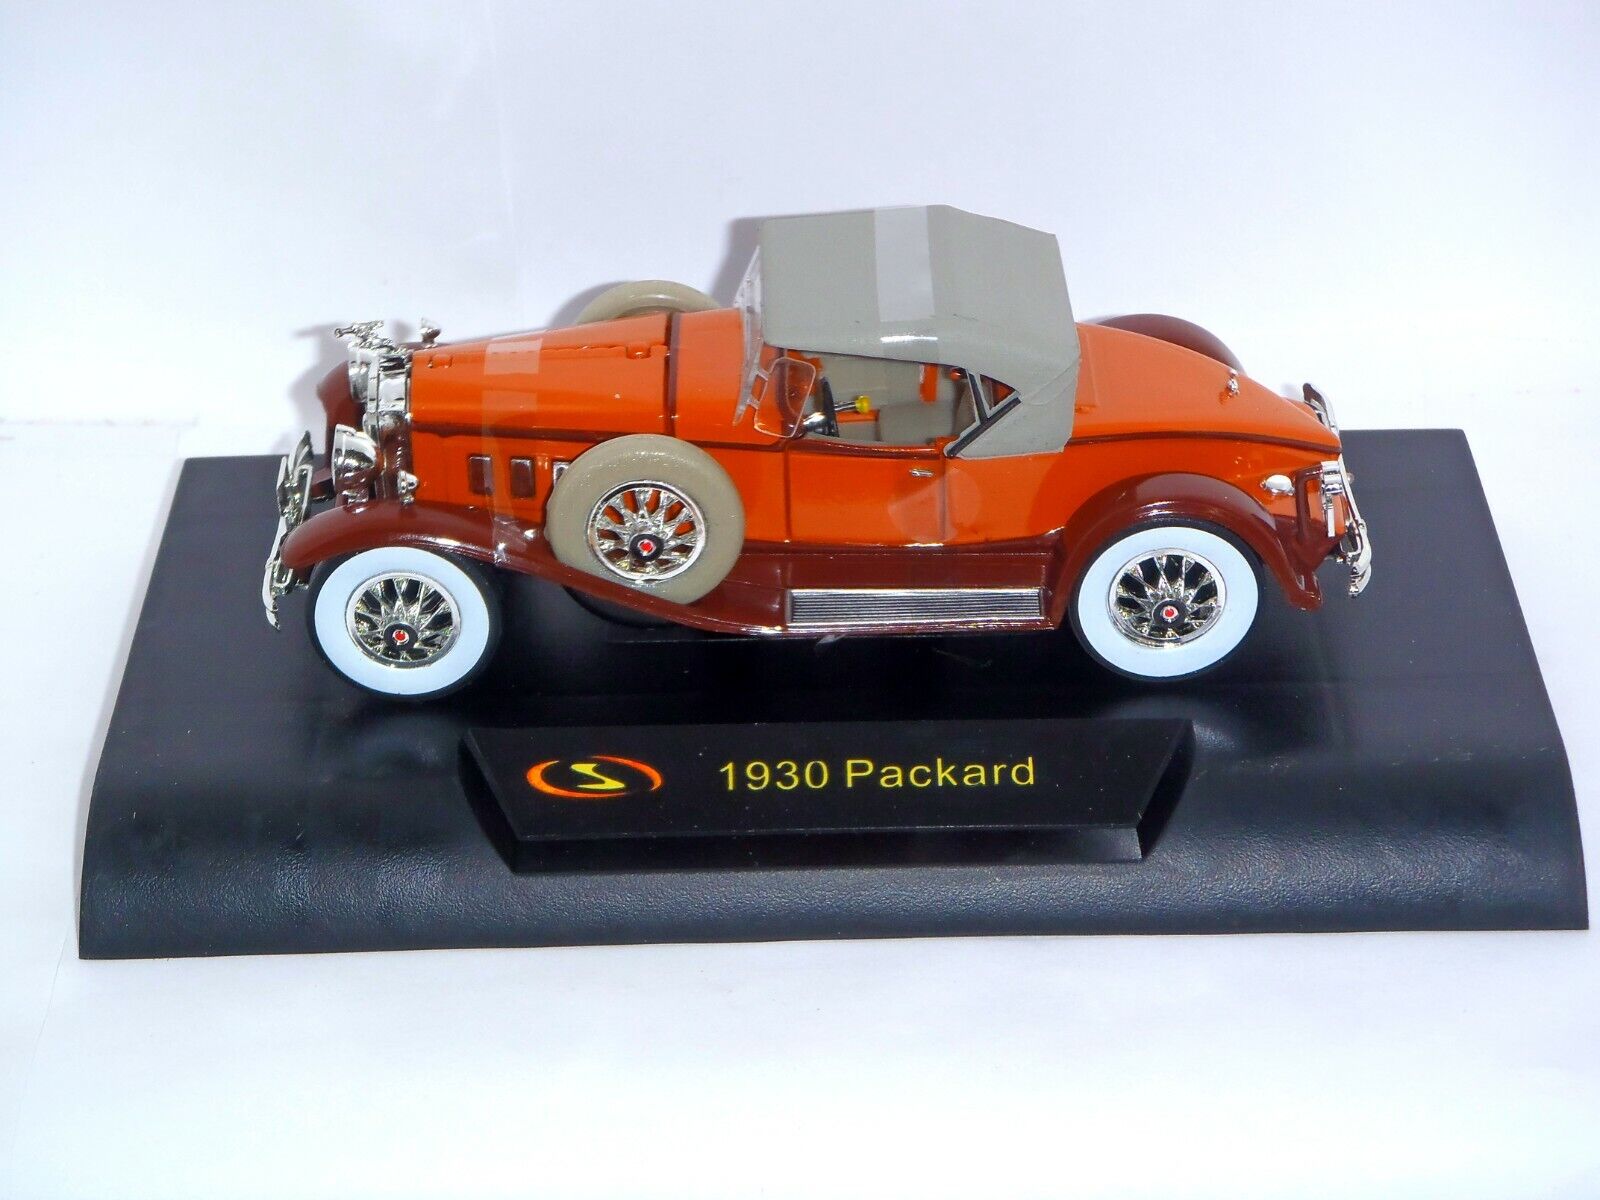 1930 Packard, BROWN 1:32 Scale - SIGNATURE MODELS #32315 - New in Box